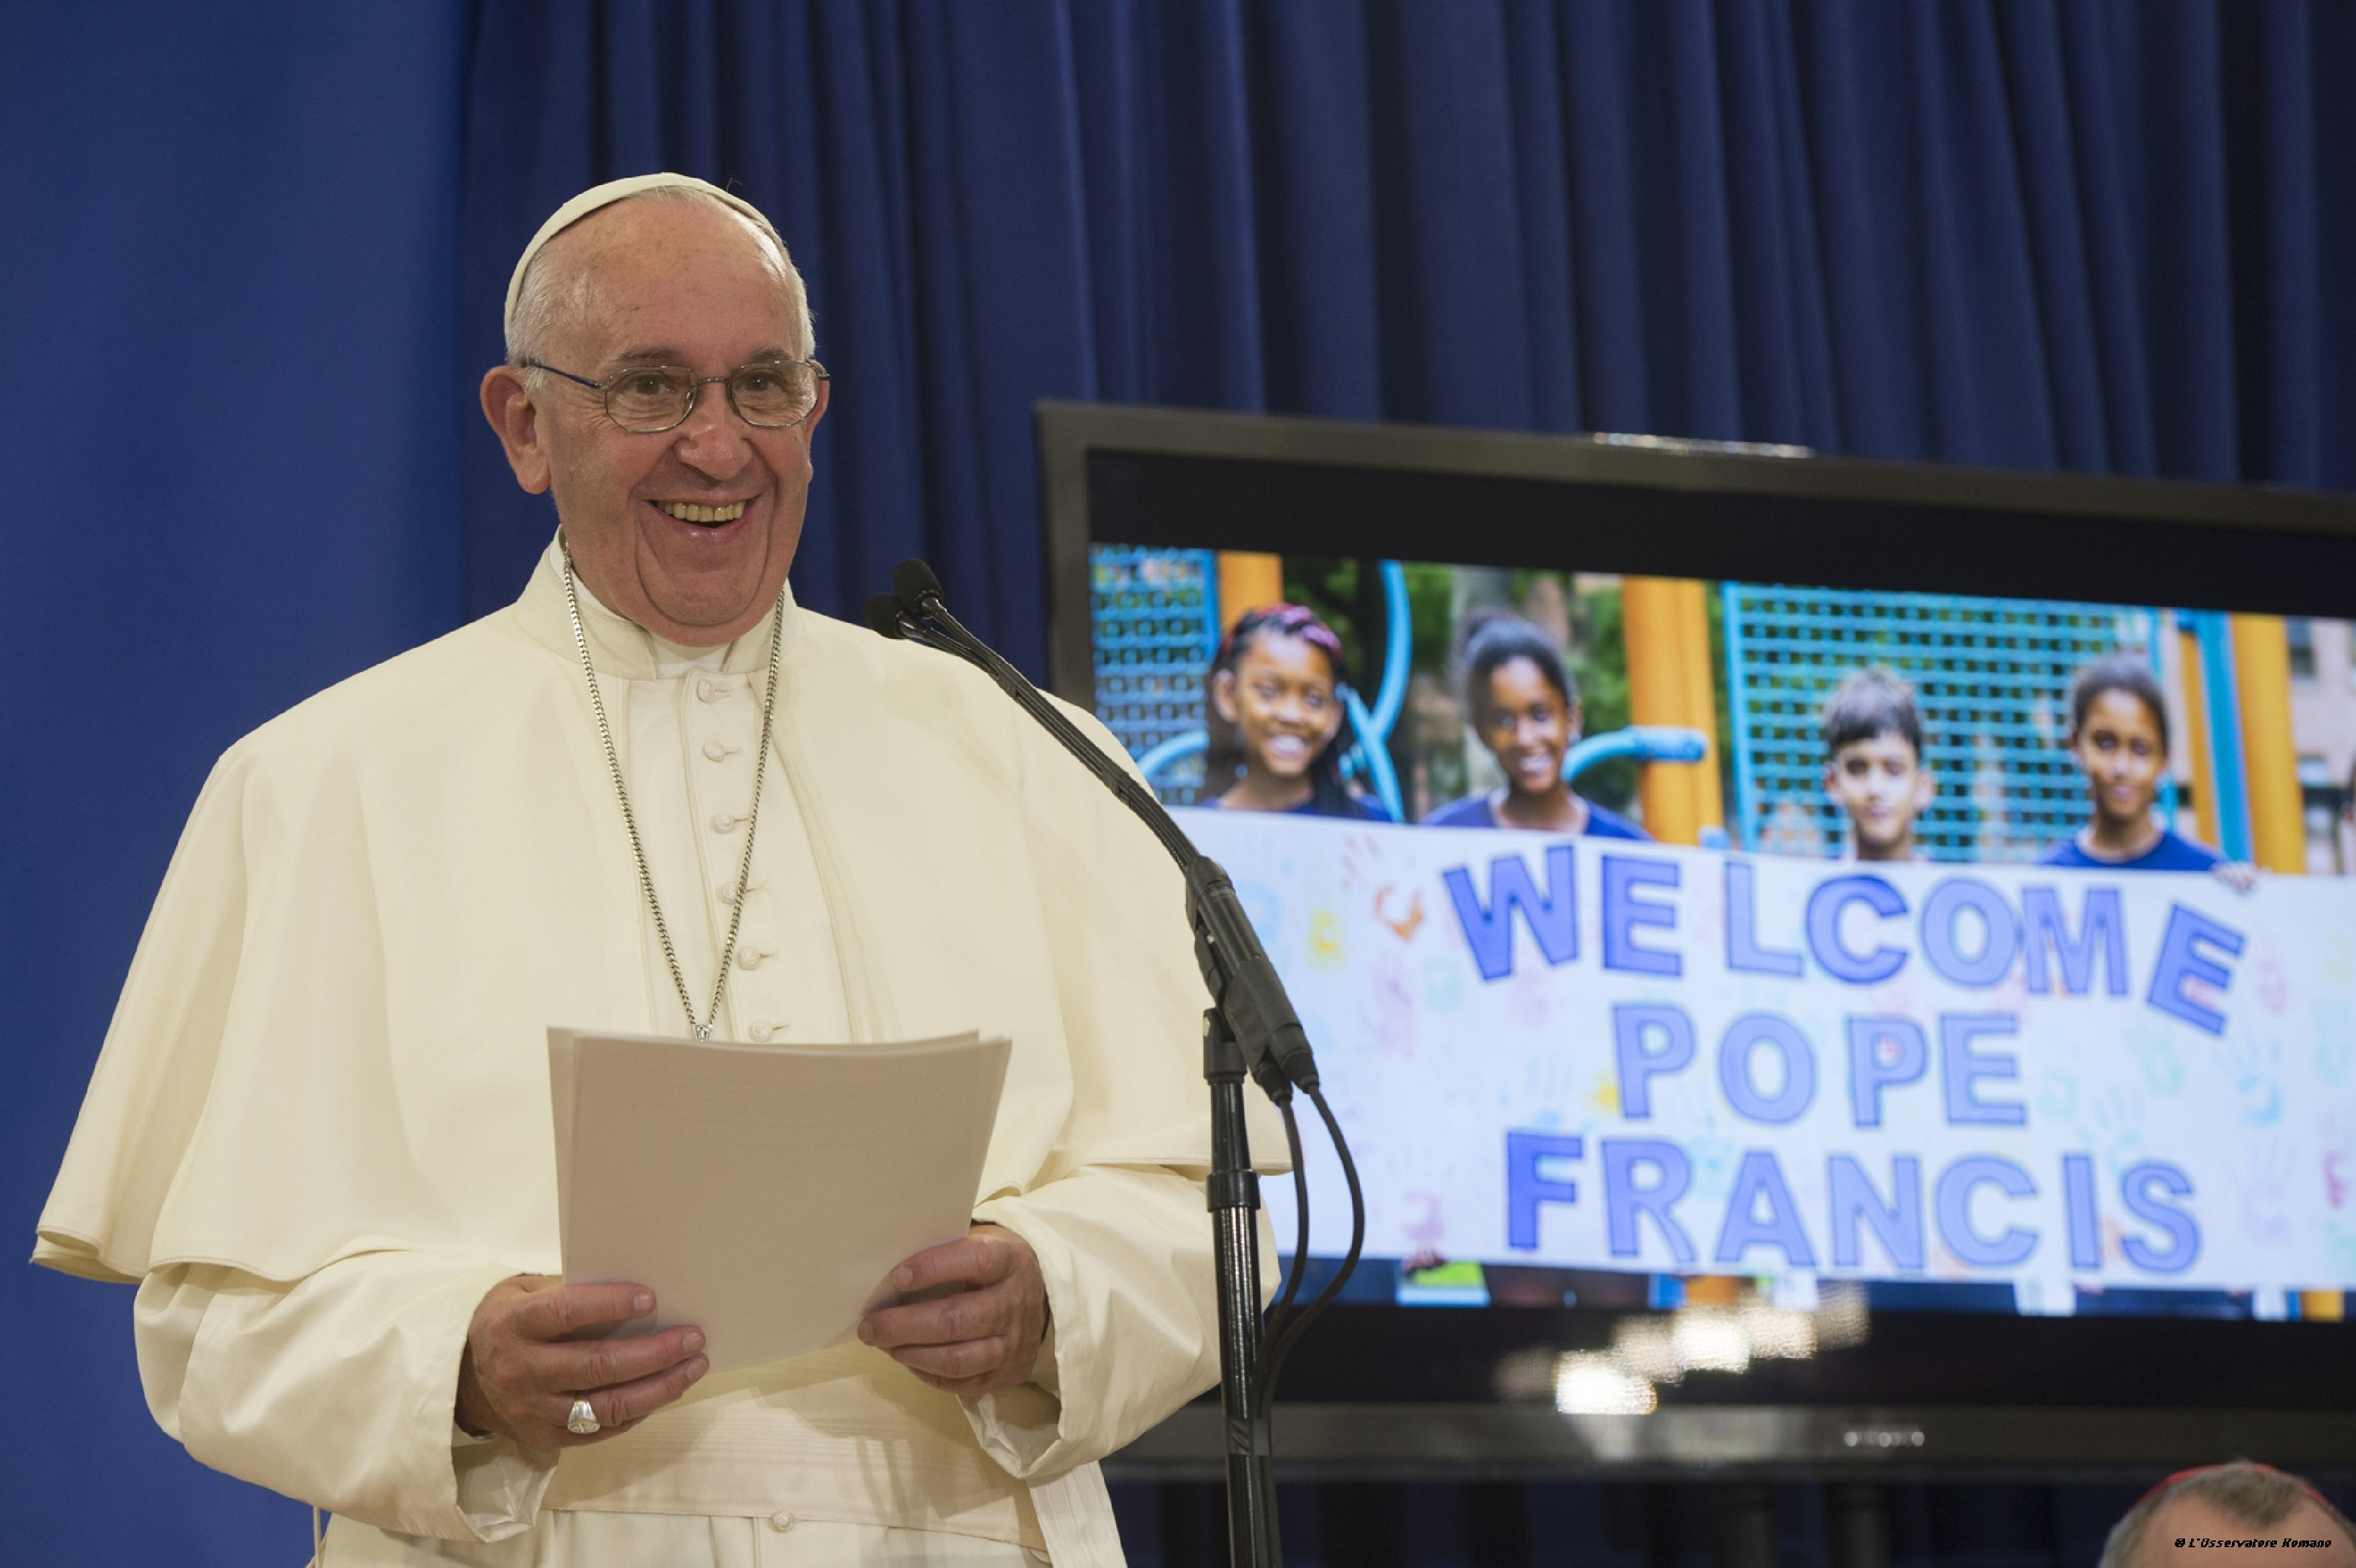 Pope Francis during his visit at Our Lady Queen of Angels School in East Harlem